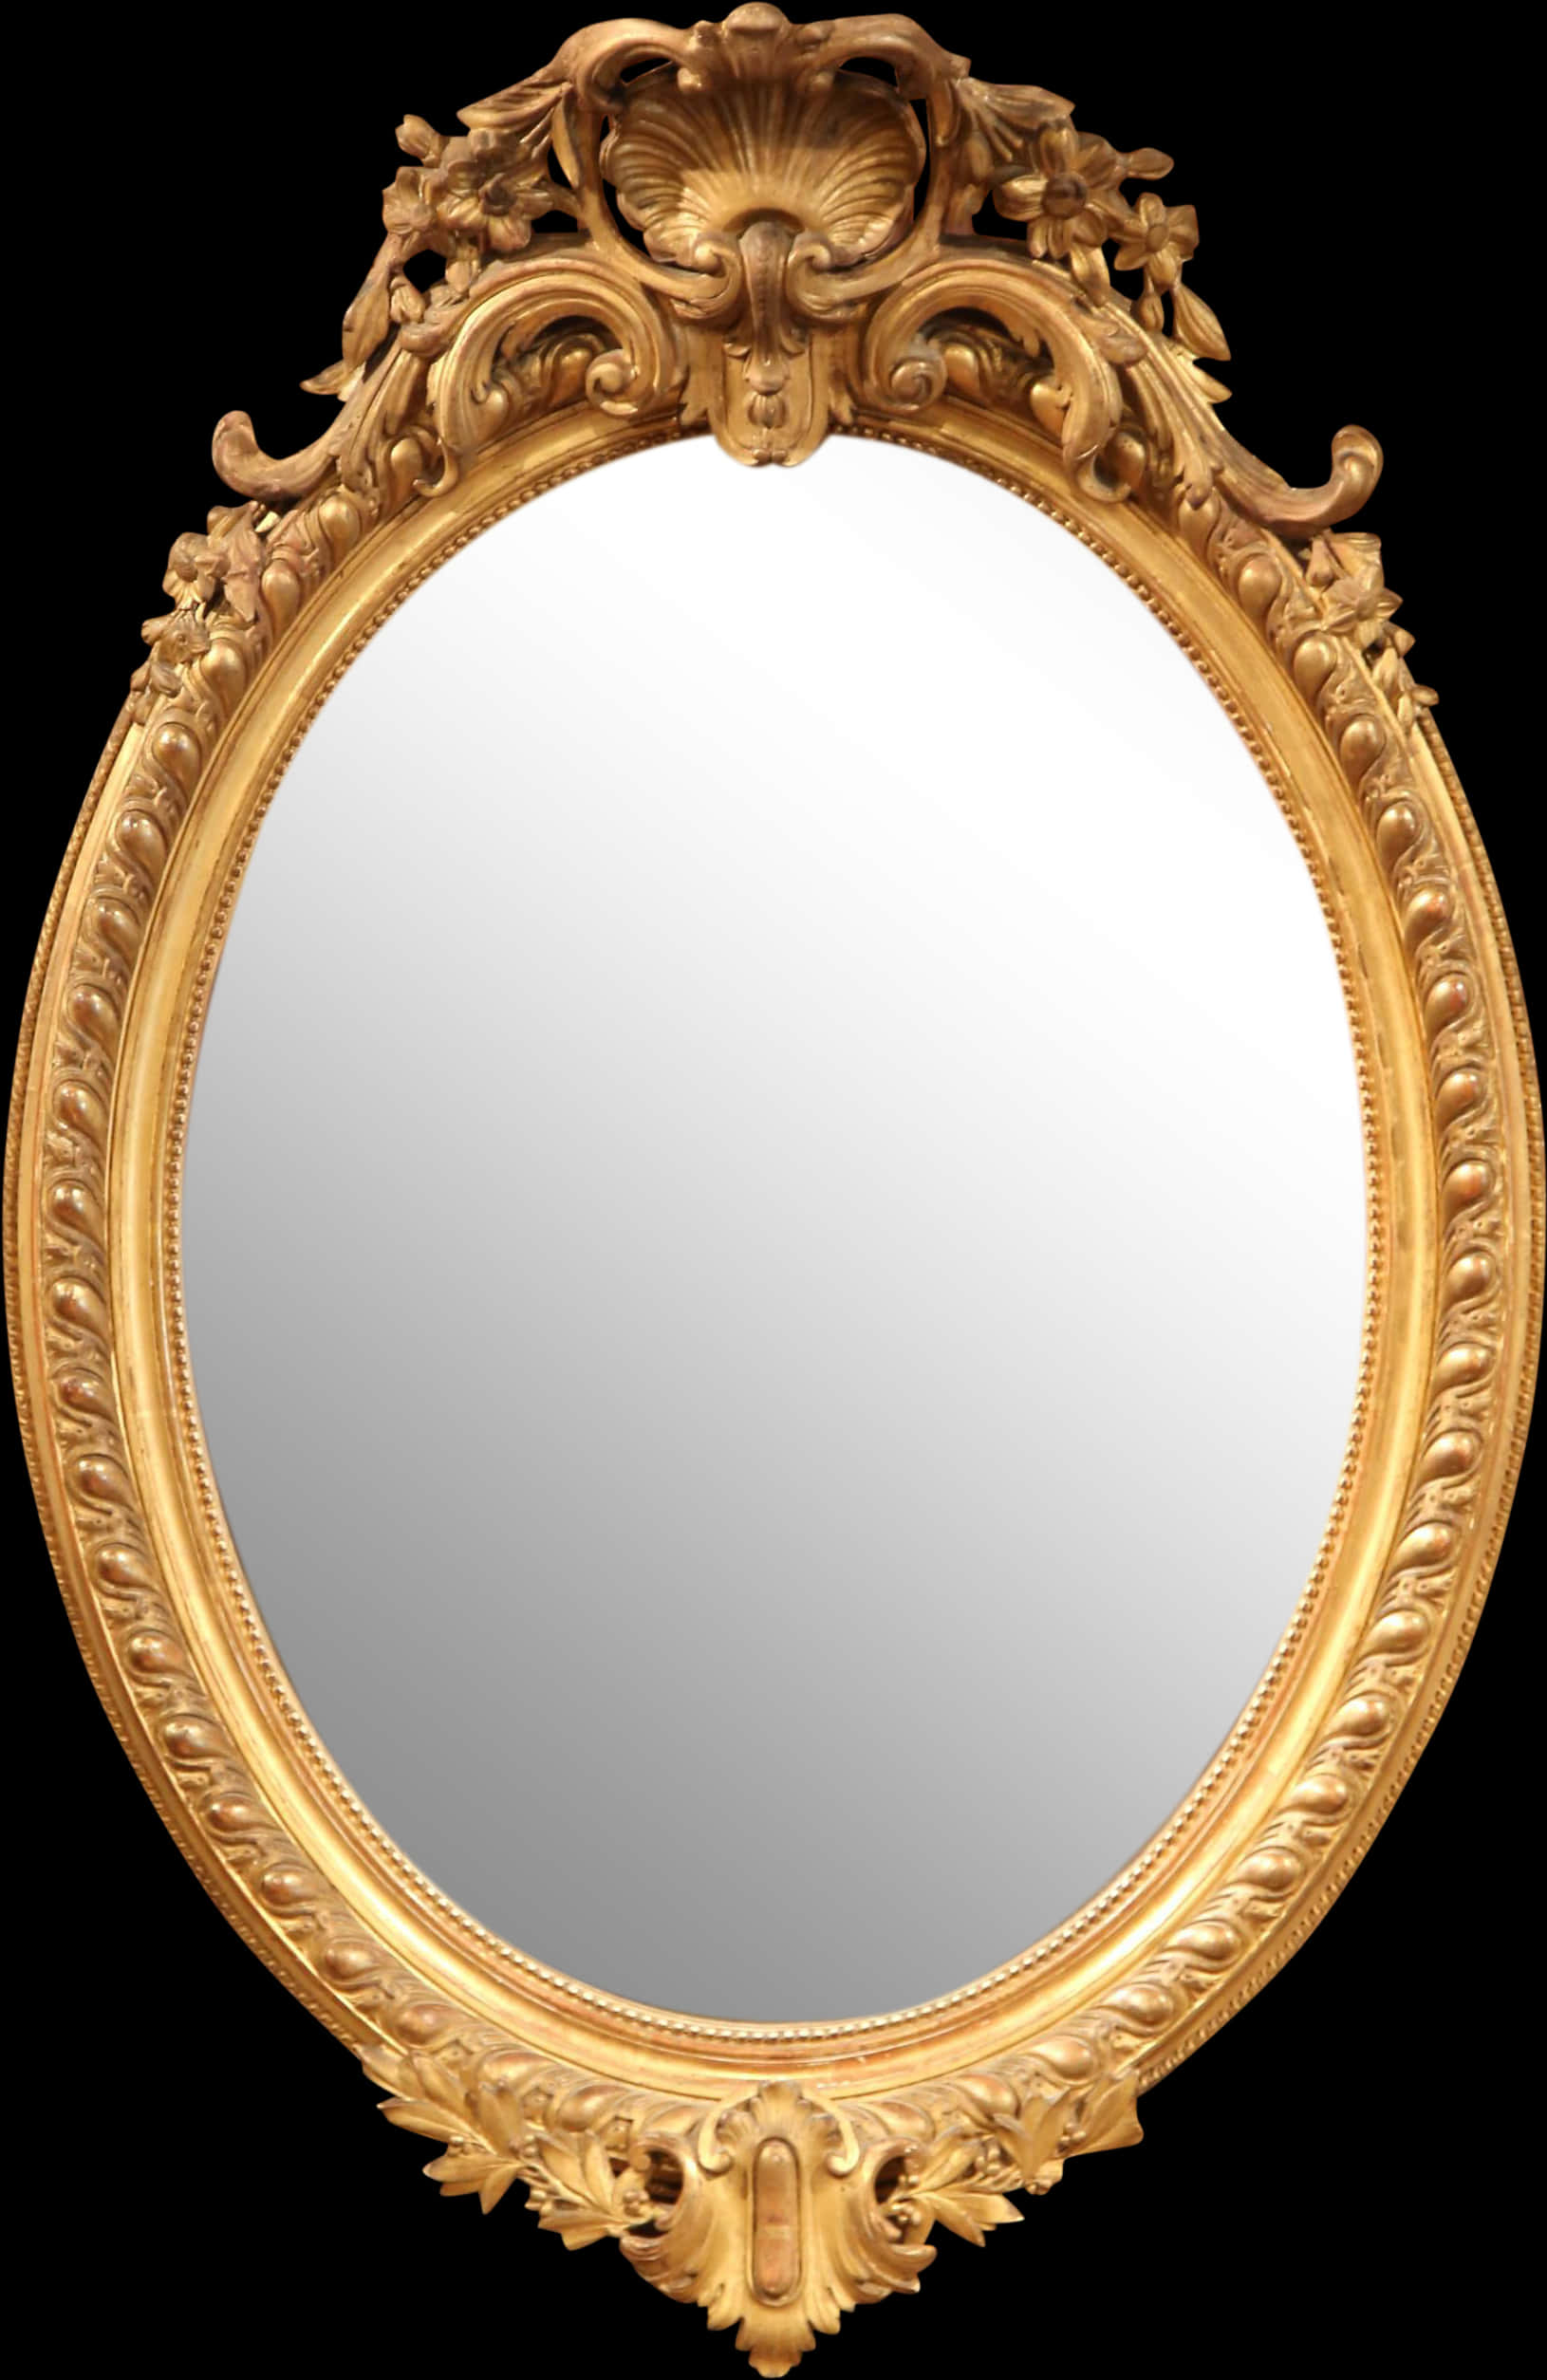 A Gold Oval Mirror With A Black Background